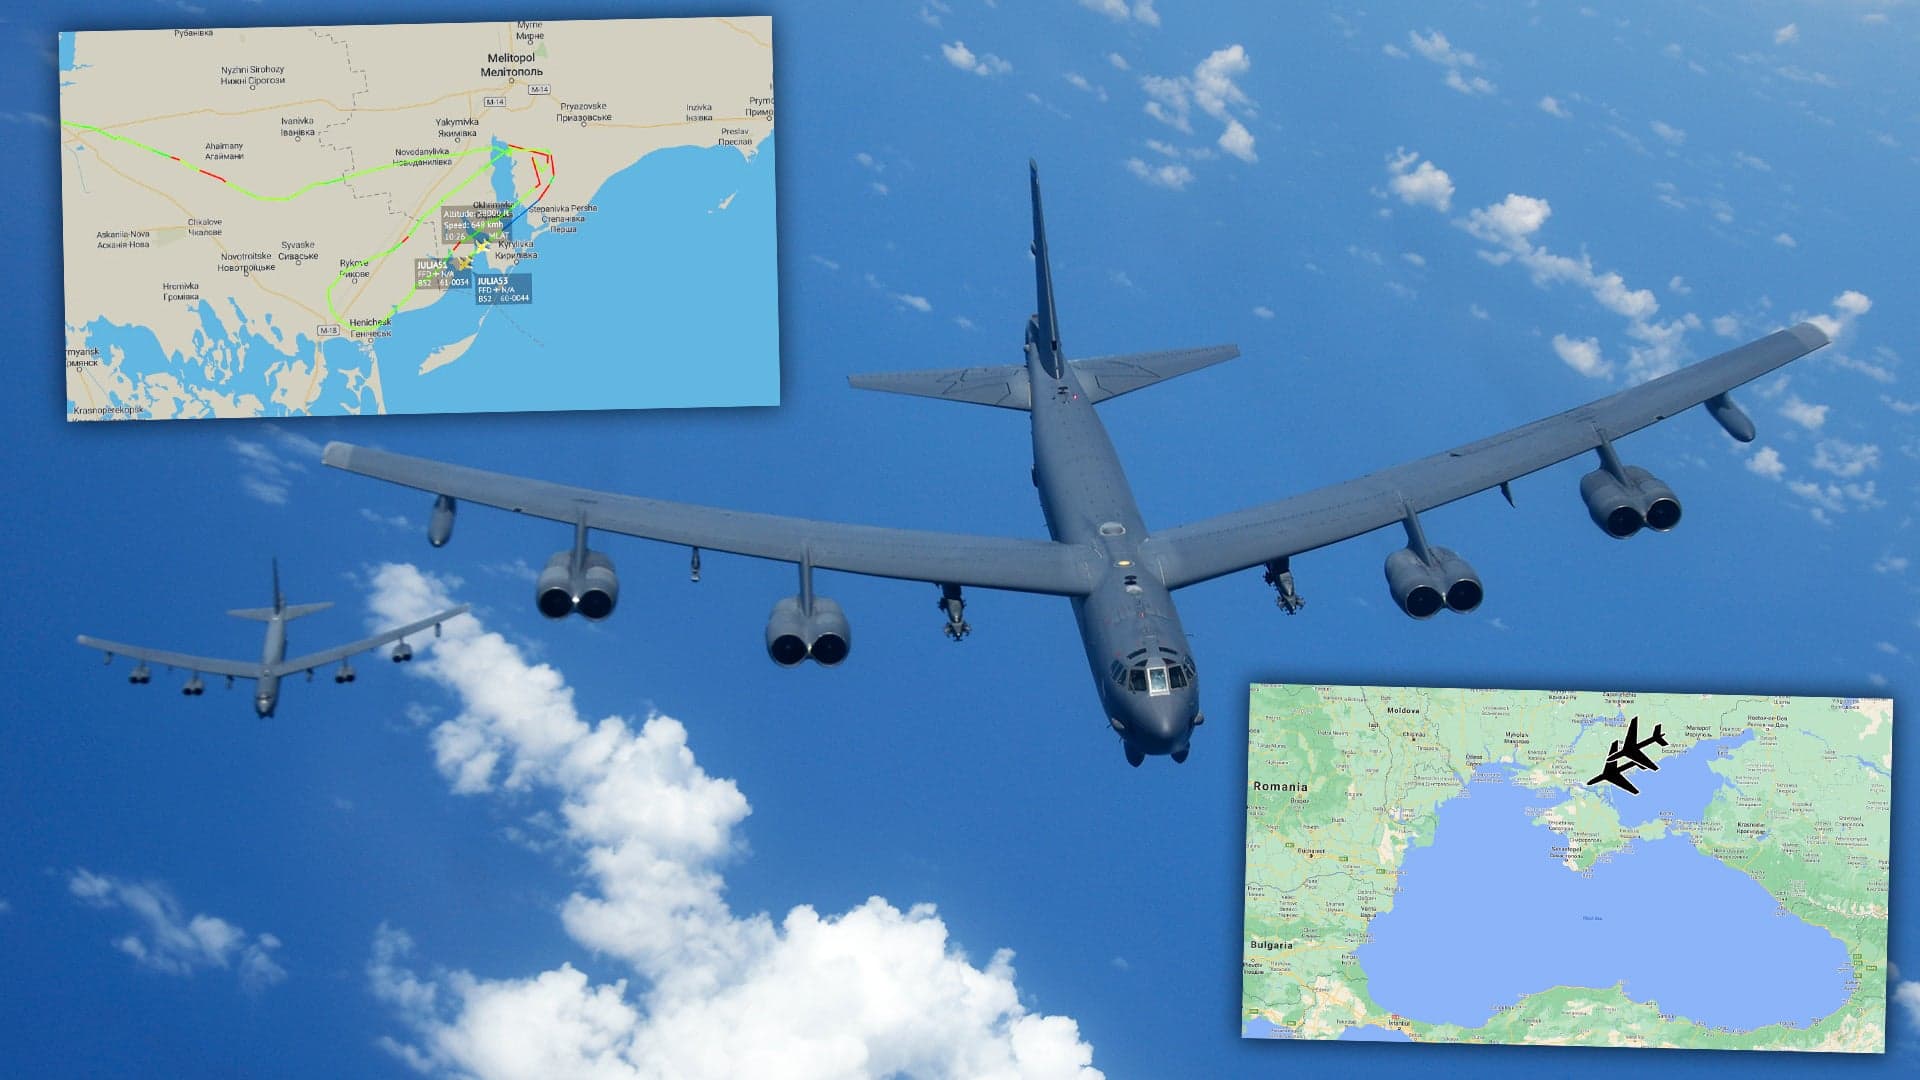 B-52 Bombers Fly Unprecedented Patrol Along Edge Of Russian-Controlled Territory In Ukraine (Updated)